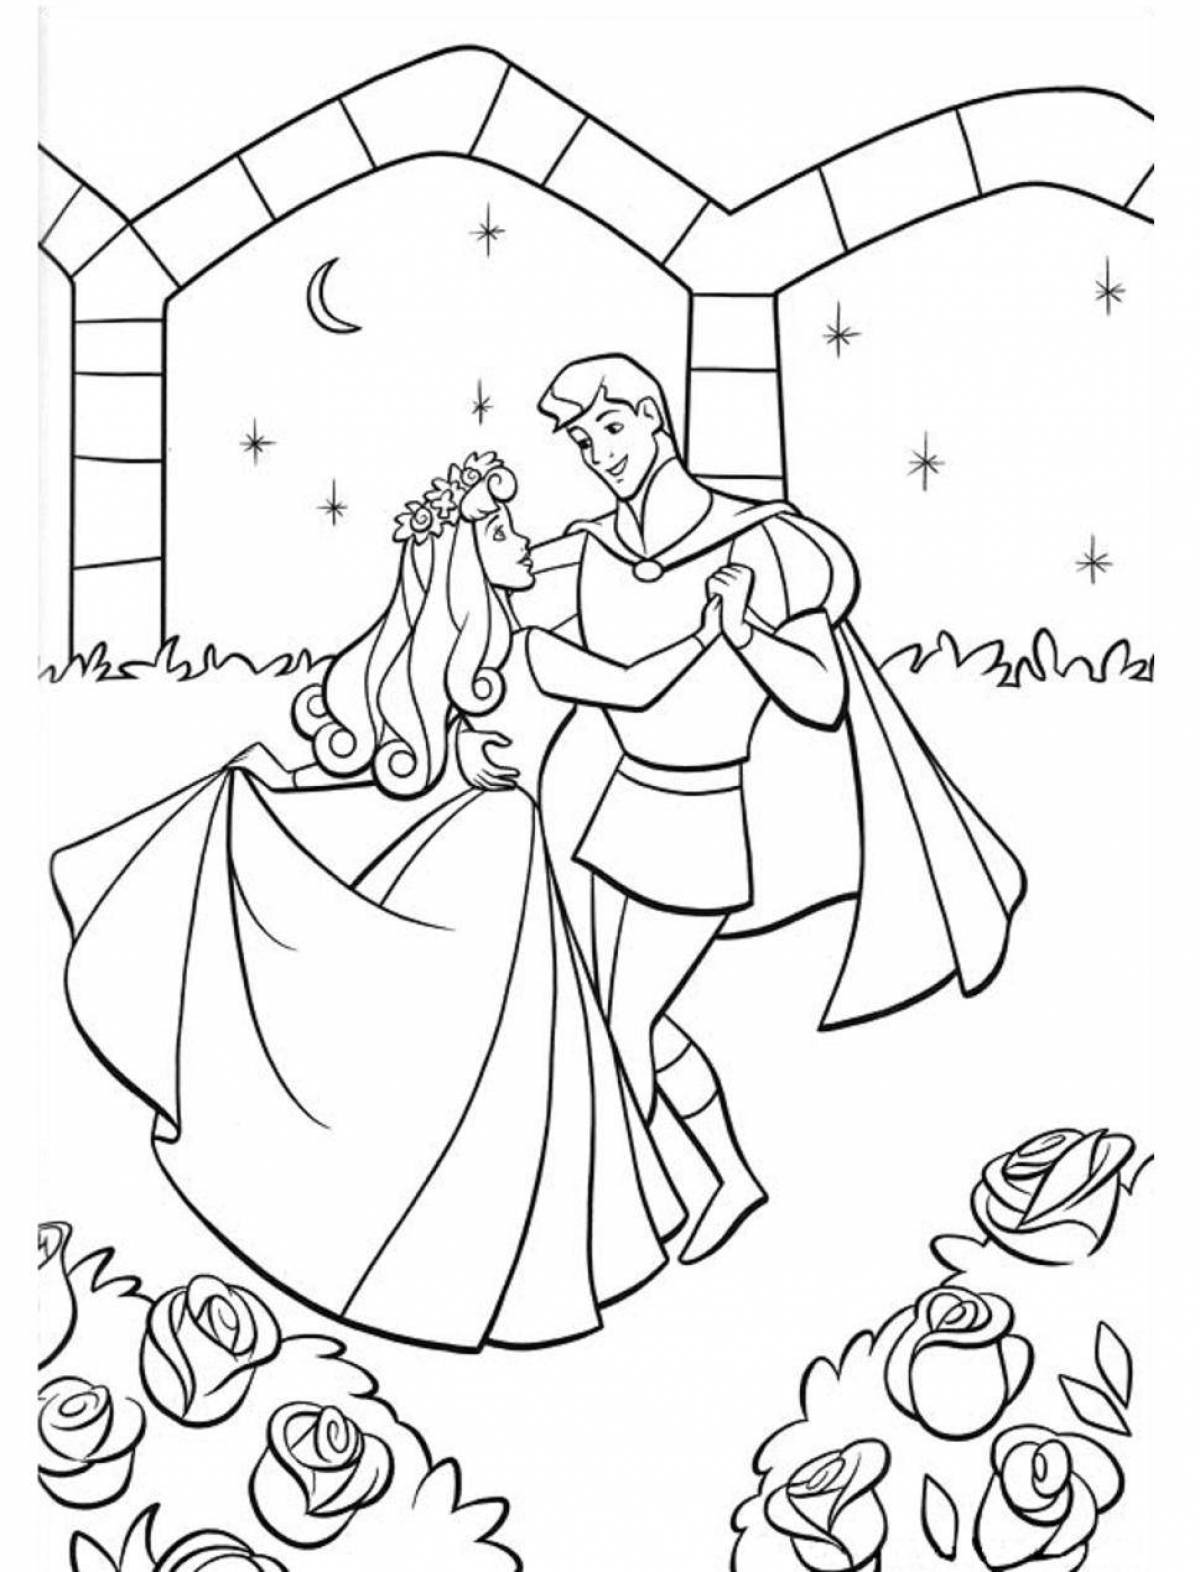 Fascinating sleeping beauty coloring book for kids